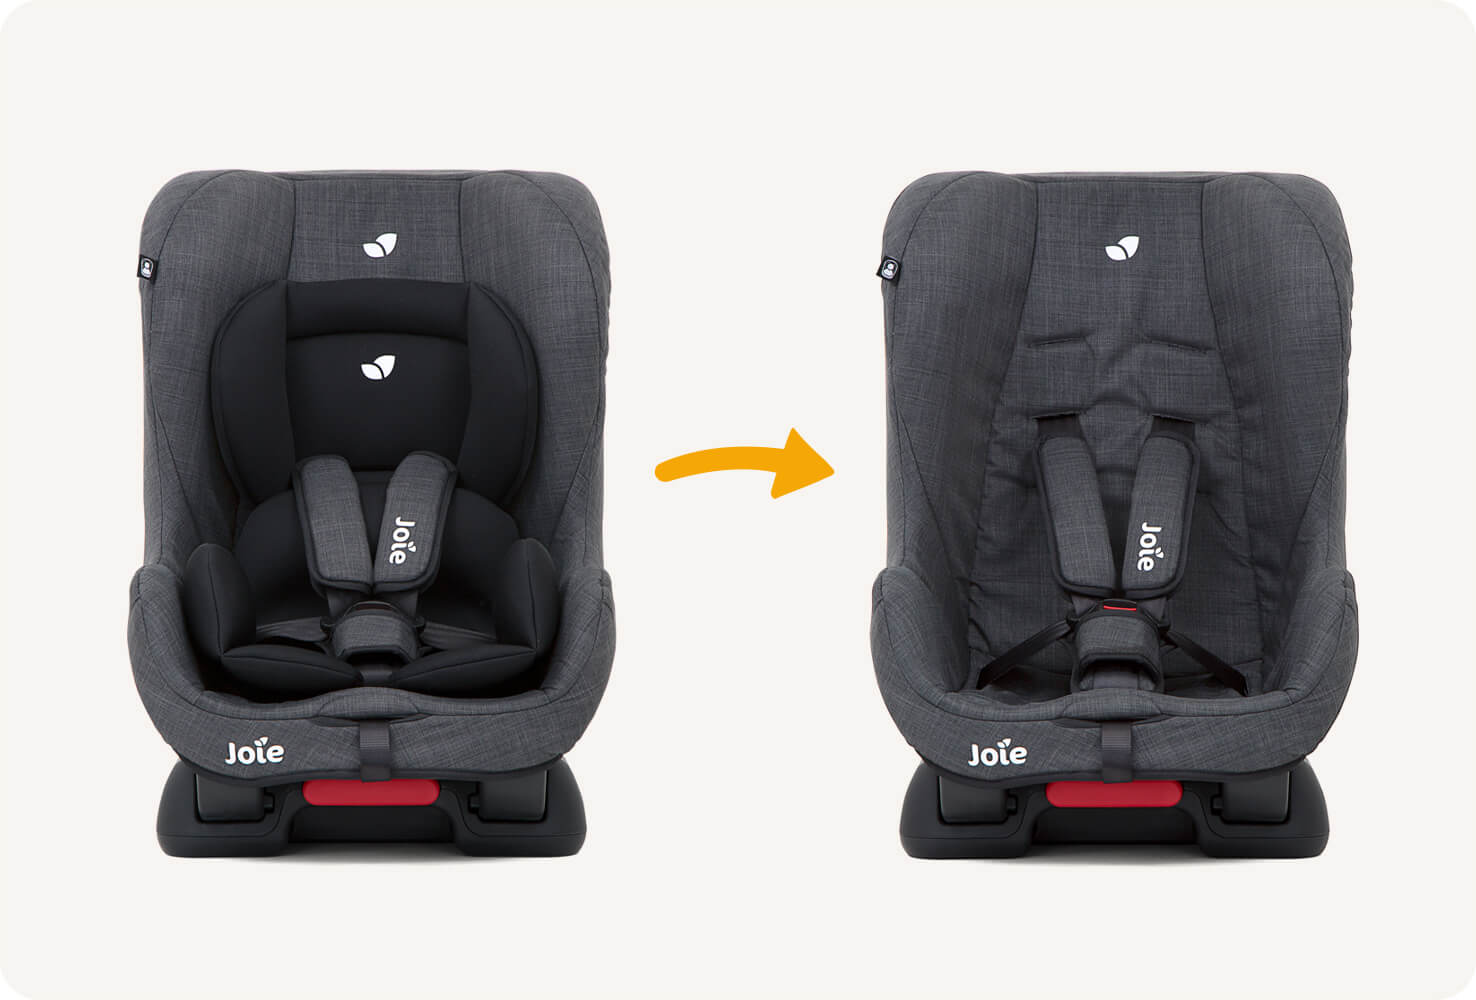  joie tilt car seat with the infant inserts in place for a snug fit